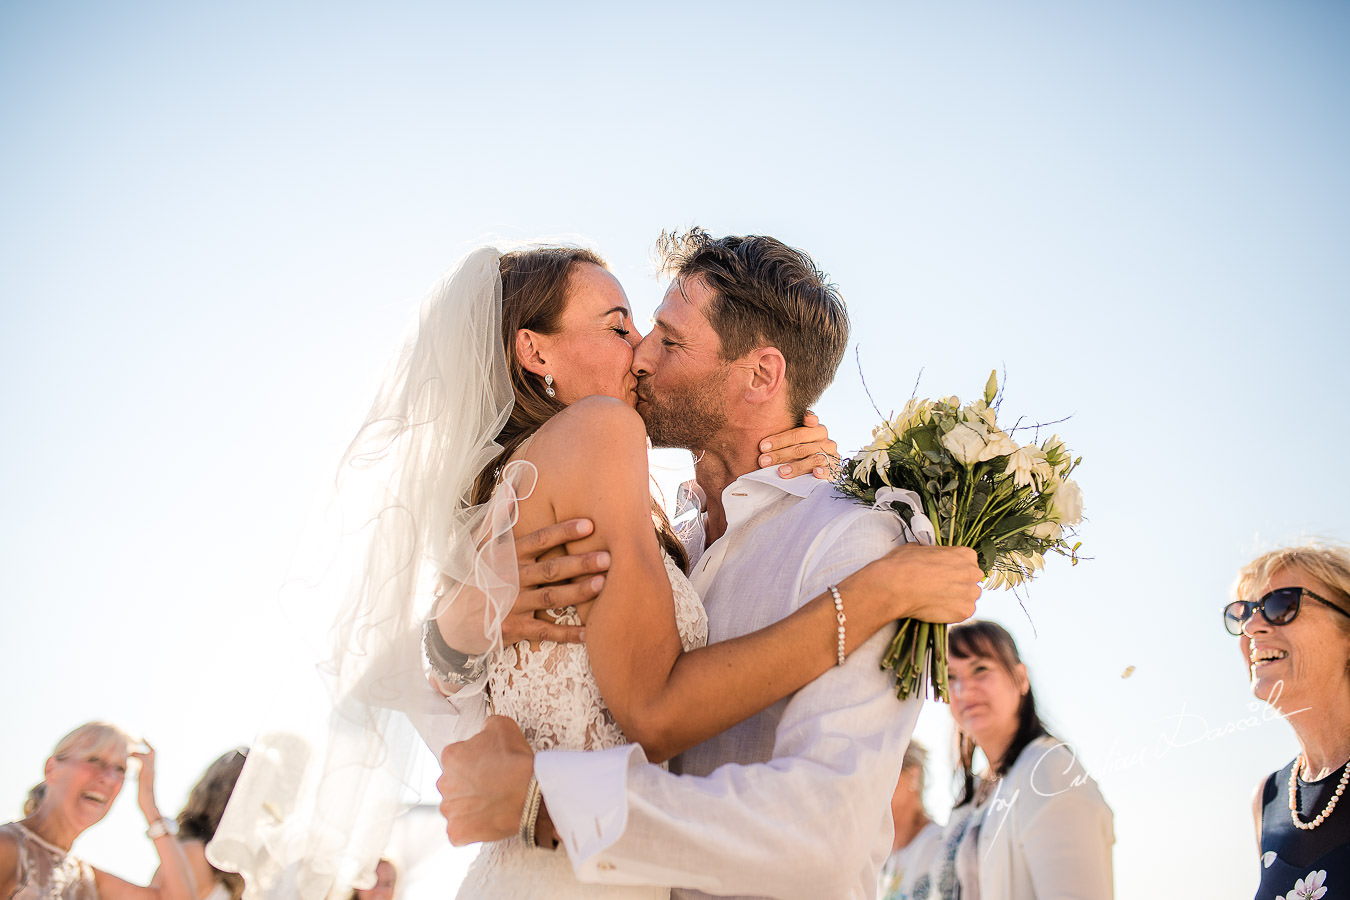 Wedding moments photographed by Cyprus Photographer Cristian Dascalu during a beautiful wedding at Cap St. George in Paphos.